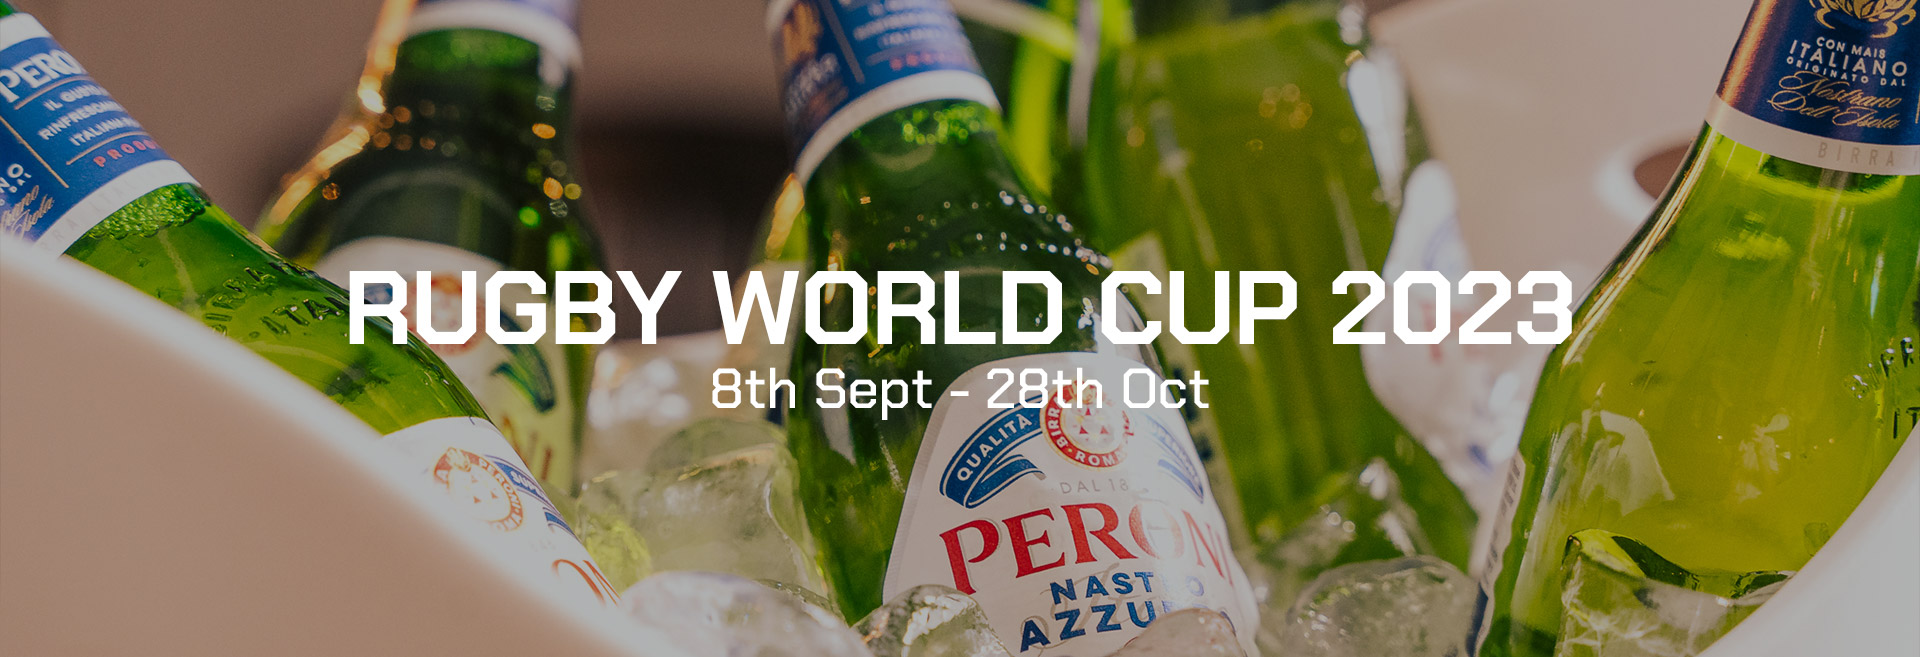 Watch the Rugby World Cup at Nation of Shopkeepers